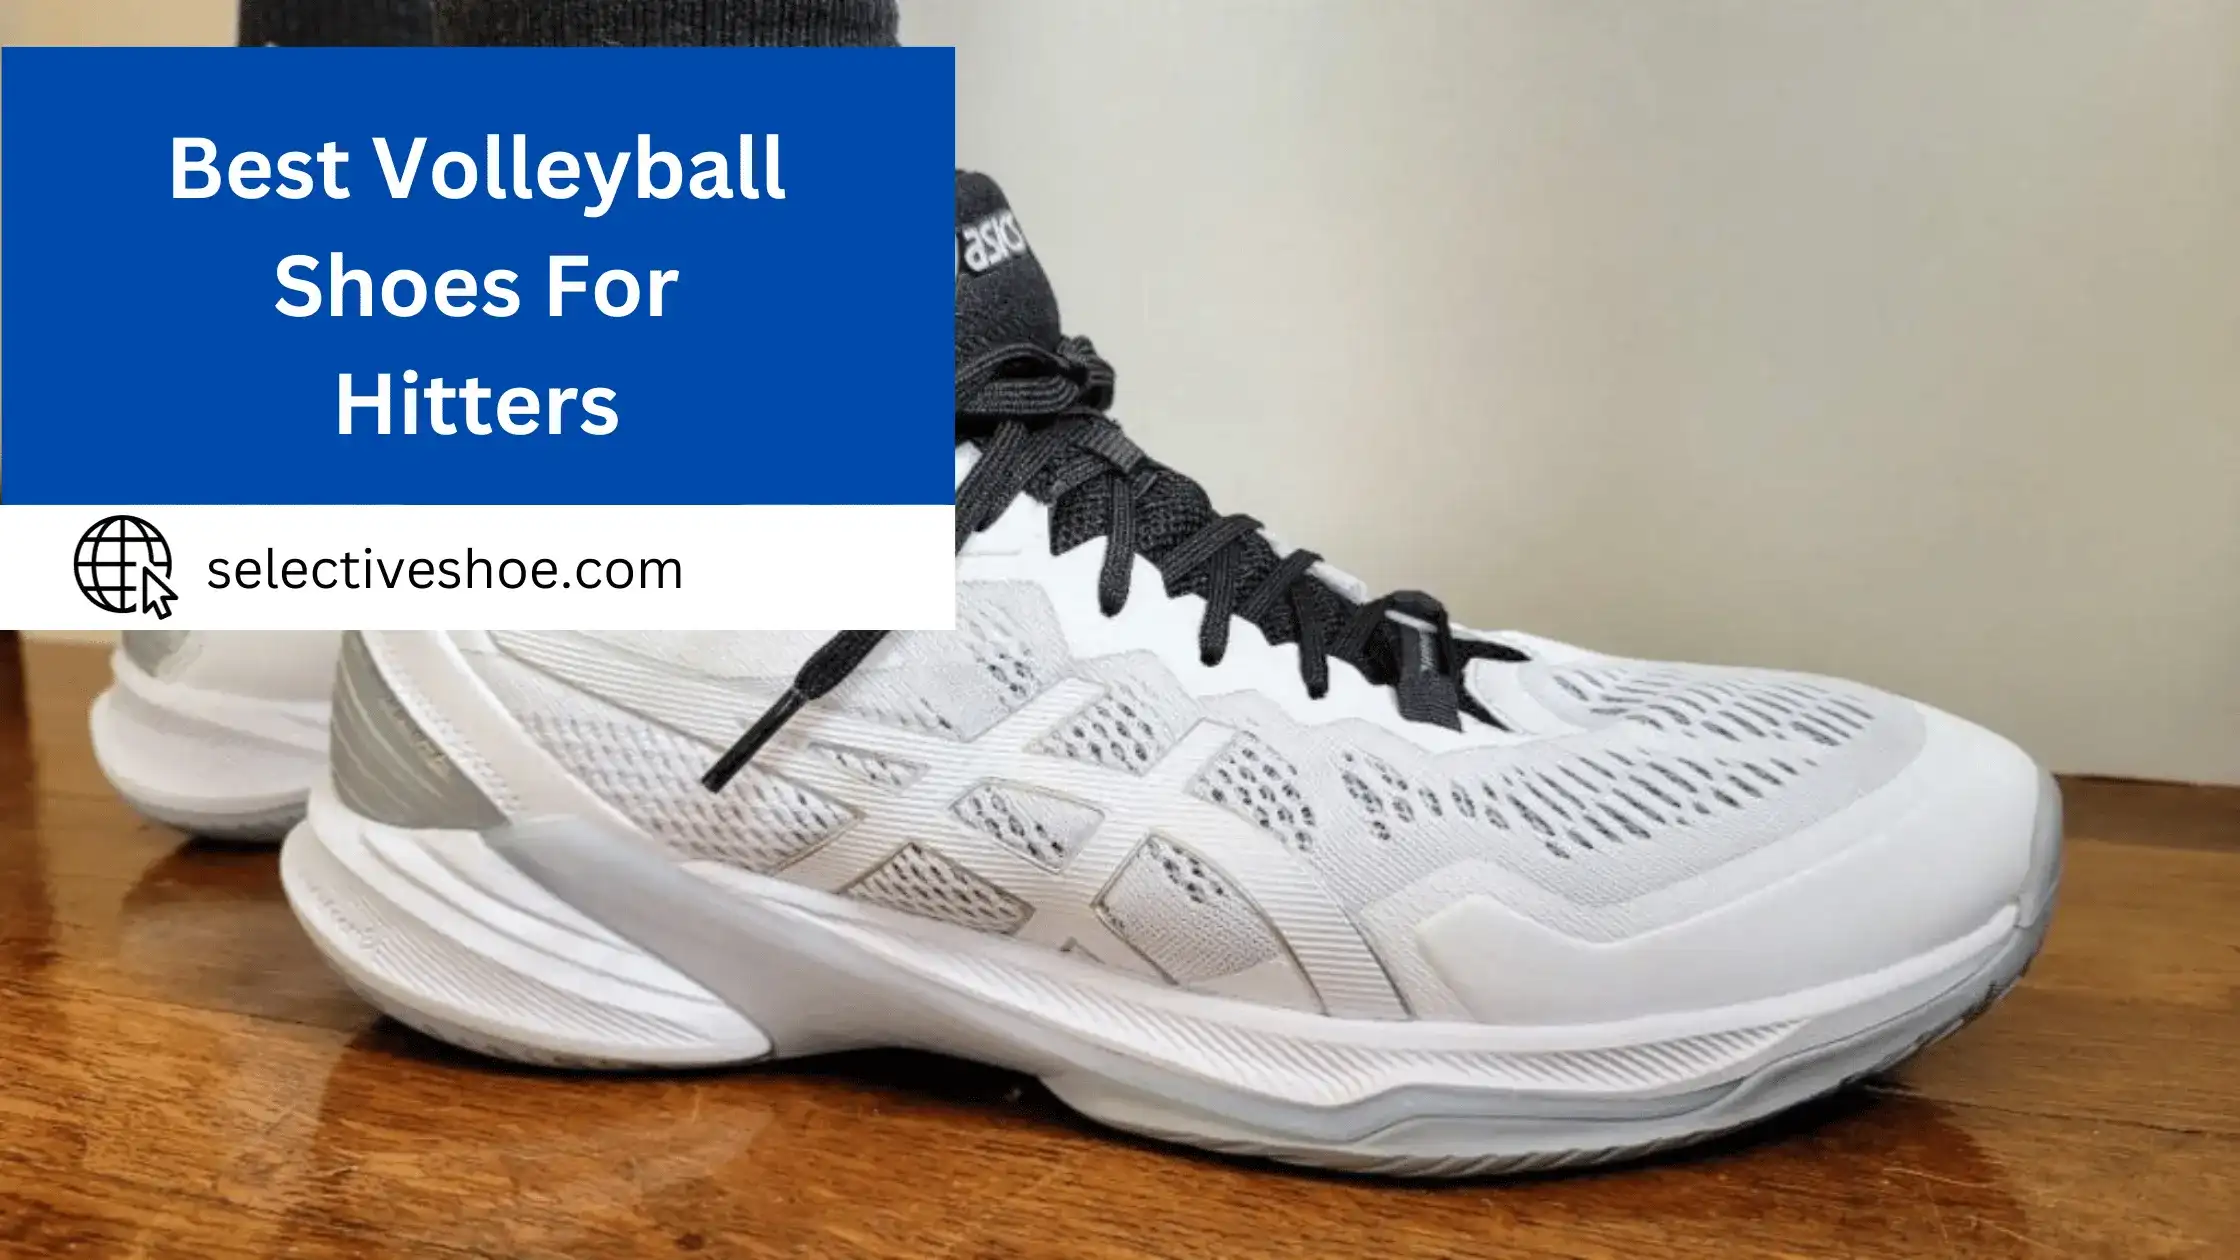 Best Volleyball Shoes For Hitters - Expert Analysis